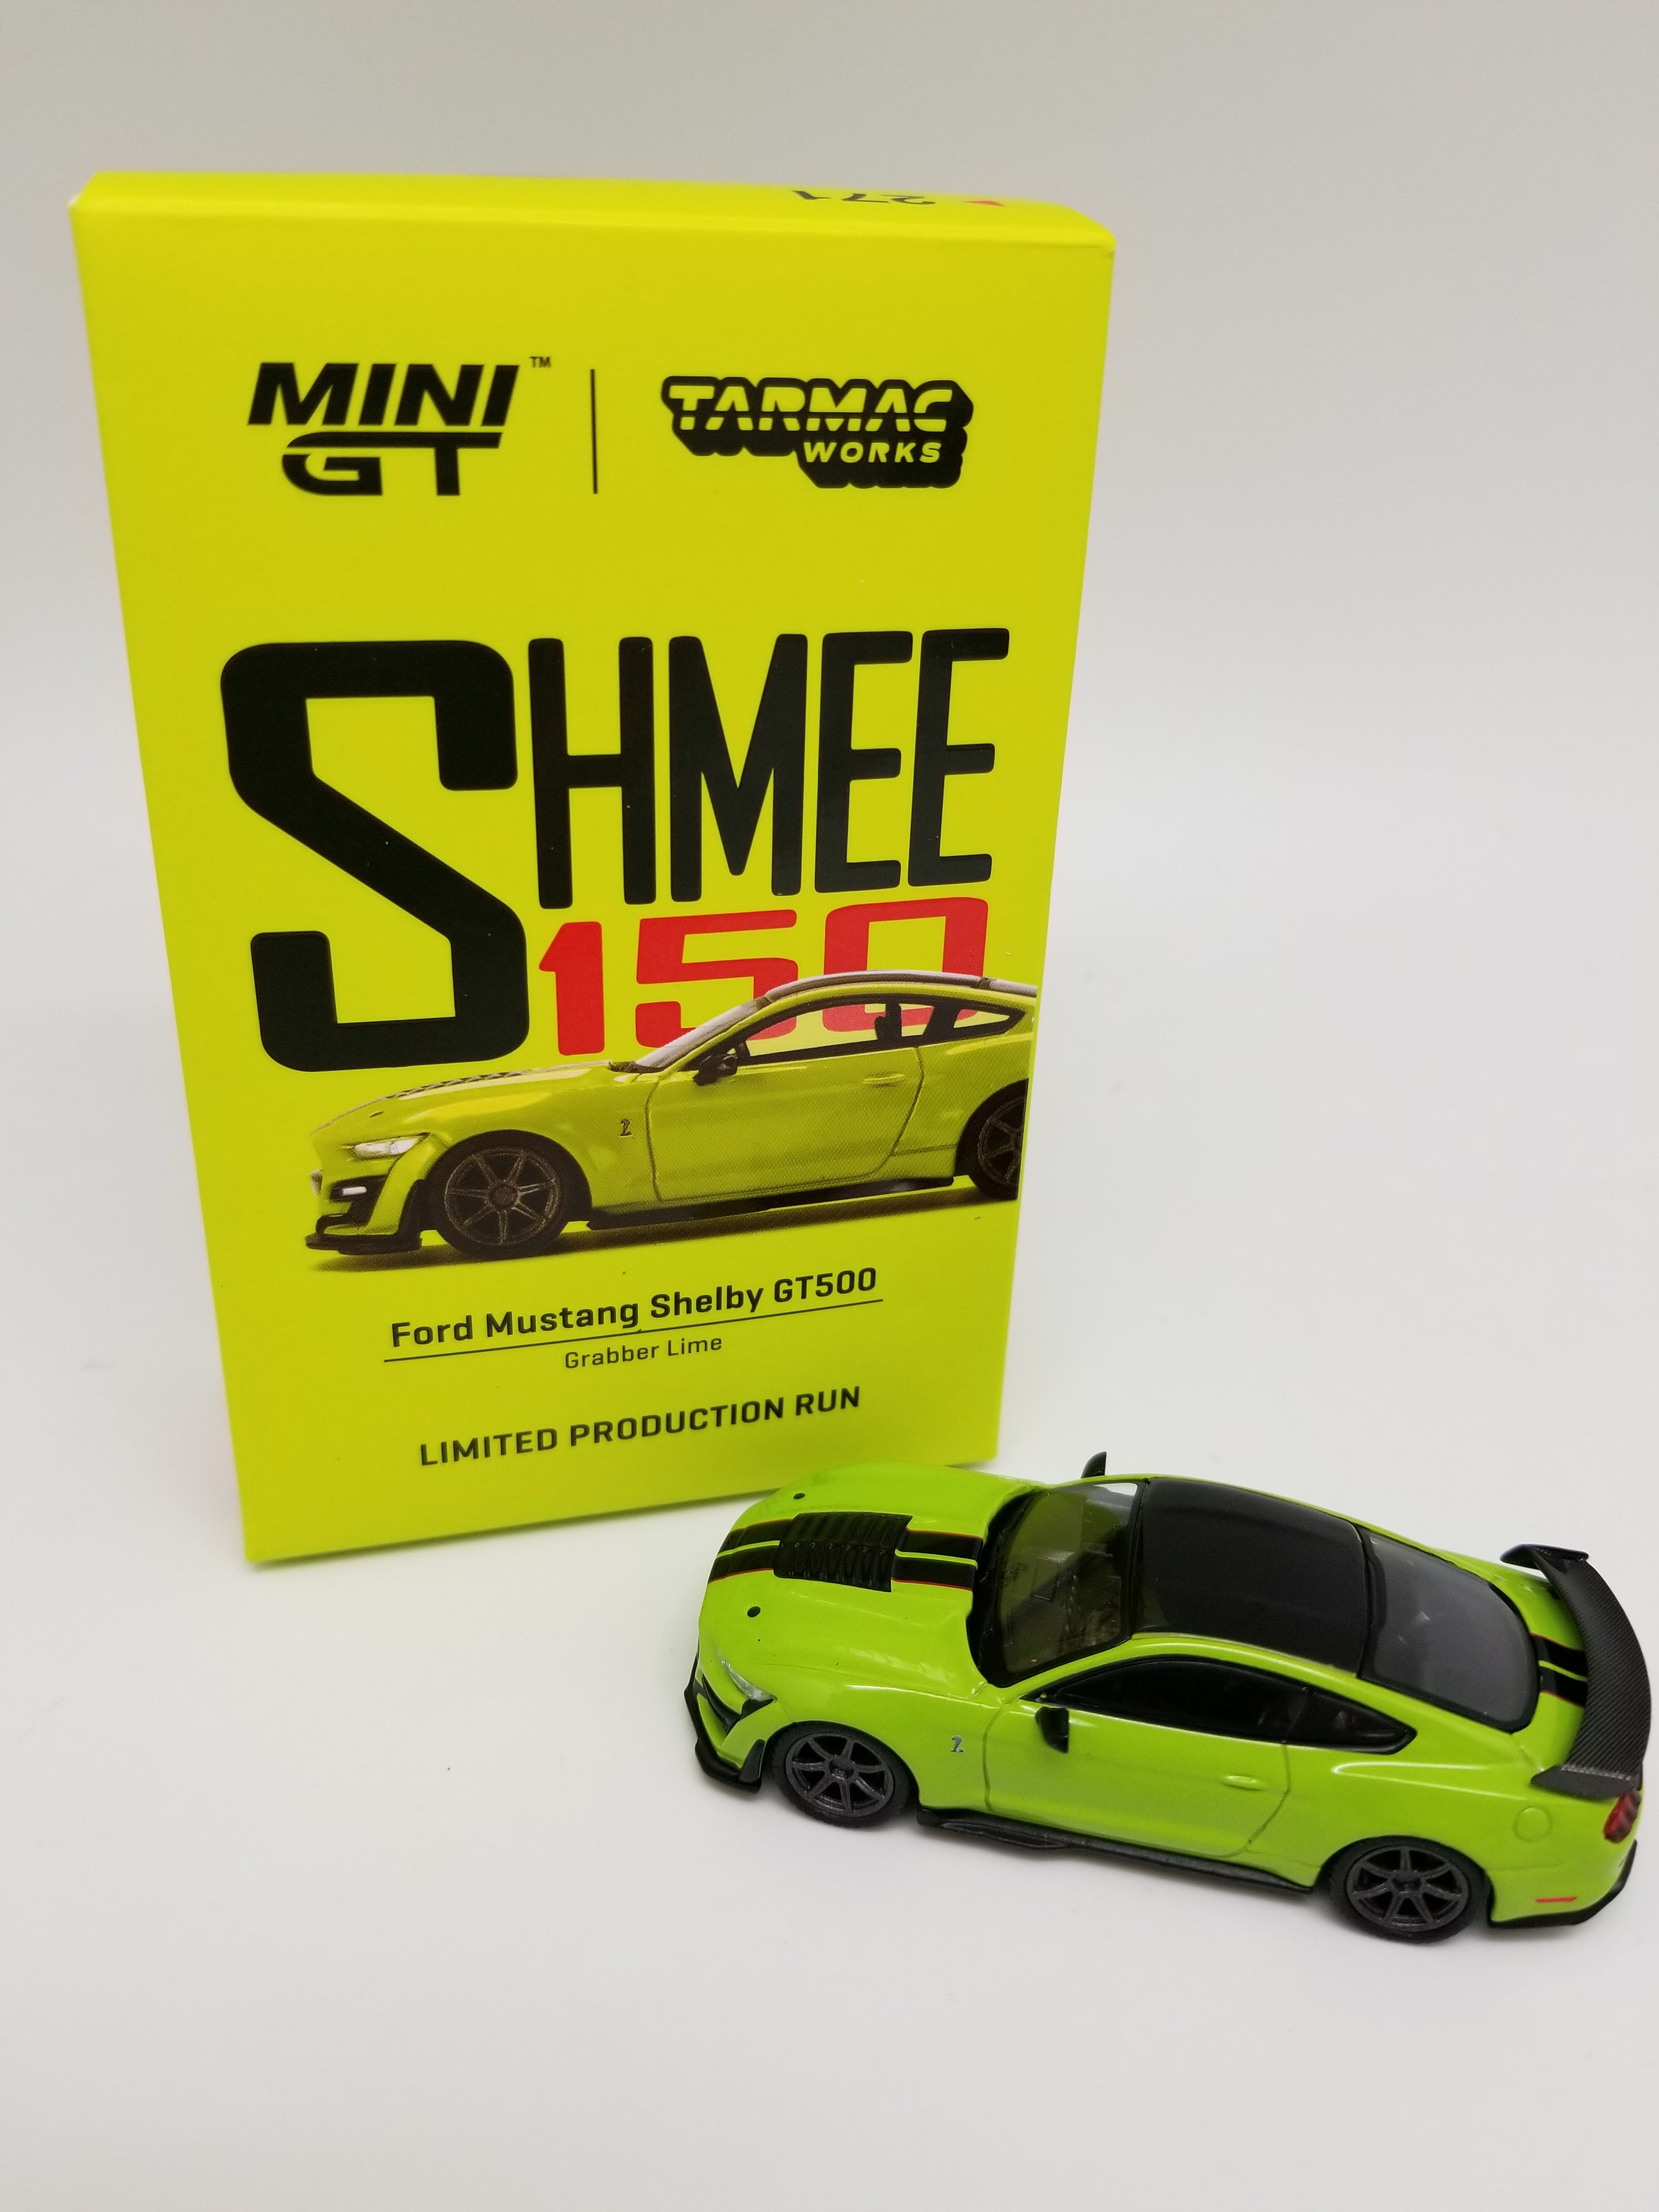 Mini GT 0271 - Tarmac Works - SHMEE150 Shelby GT500 - GRABBER LIME 